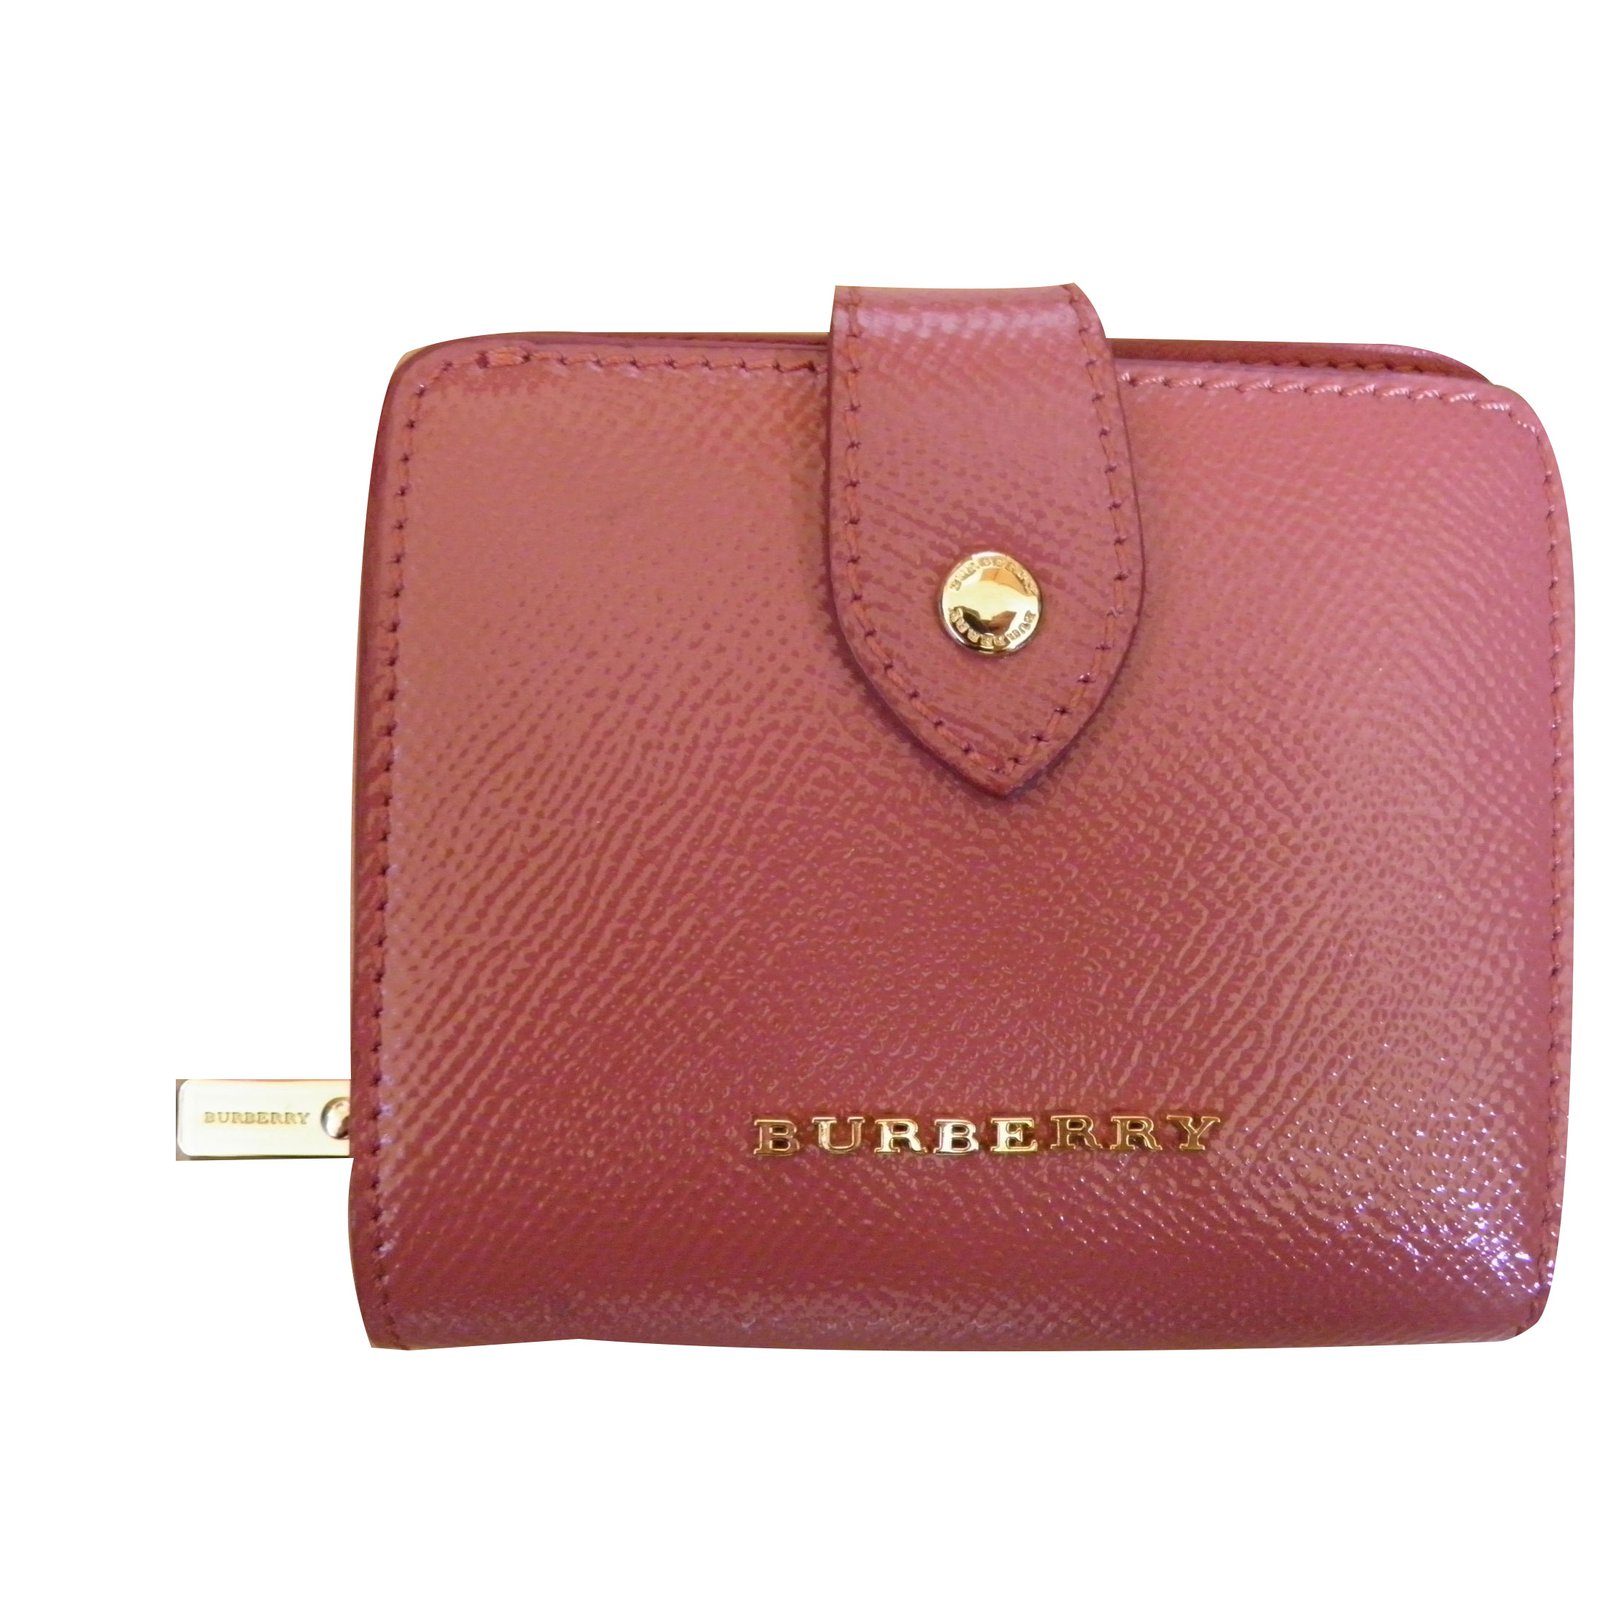 Burberry Pink Wallets for Women